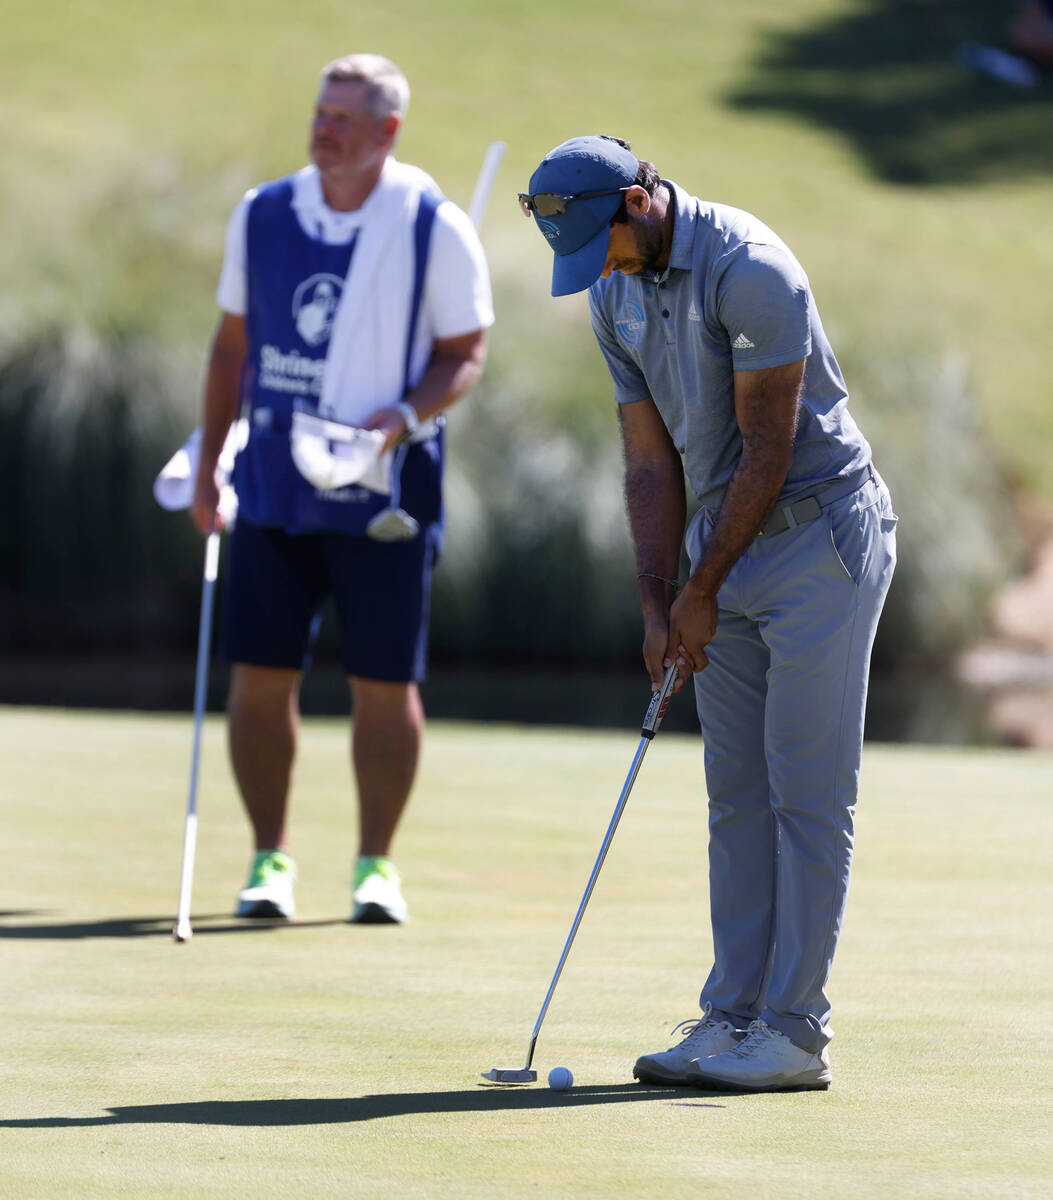 Aaron Rai watches his putt eighteenth green during the third round of the Shriners Children's O ...